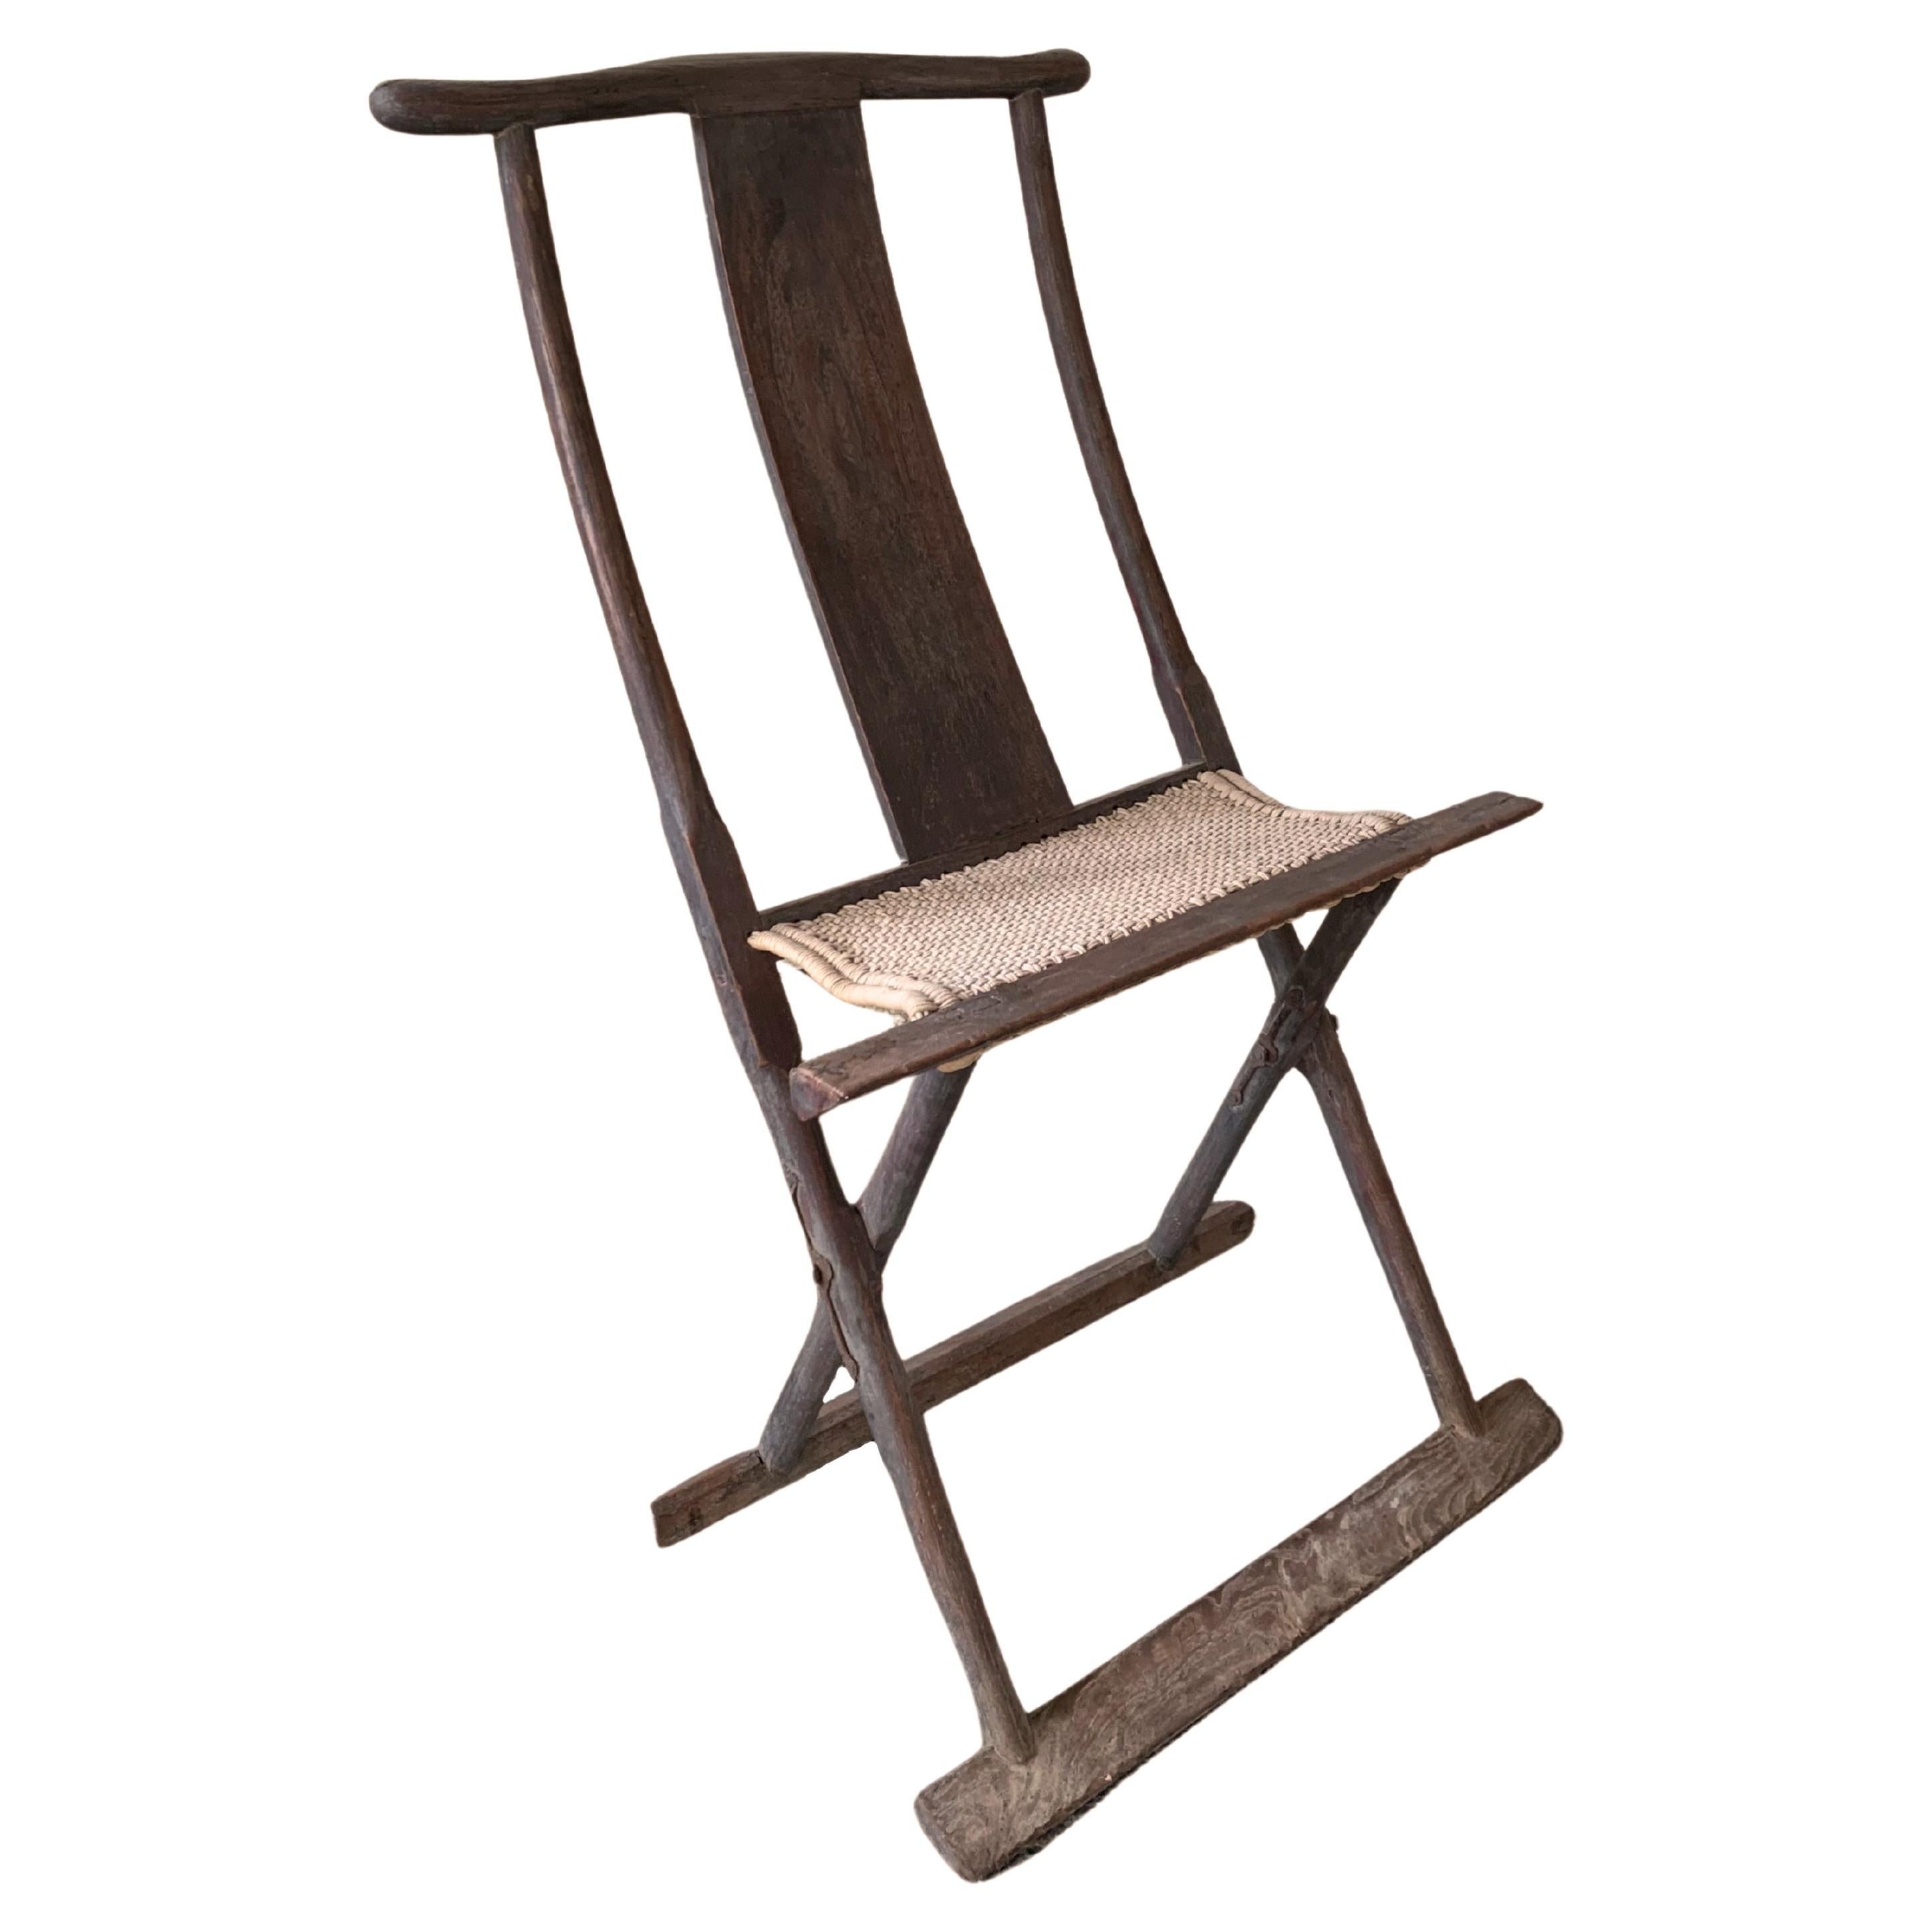 Antique Chinese Folding Chair with Woven Fabric Seat, c. 1900 For Sale